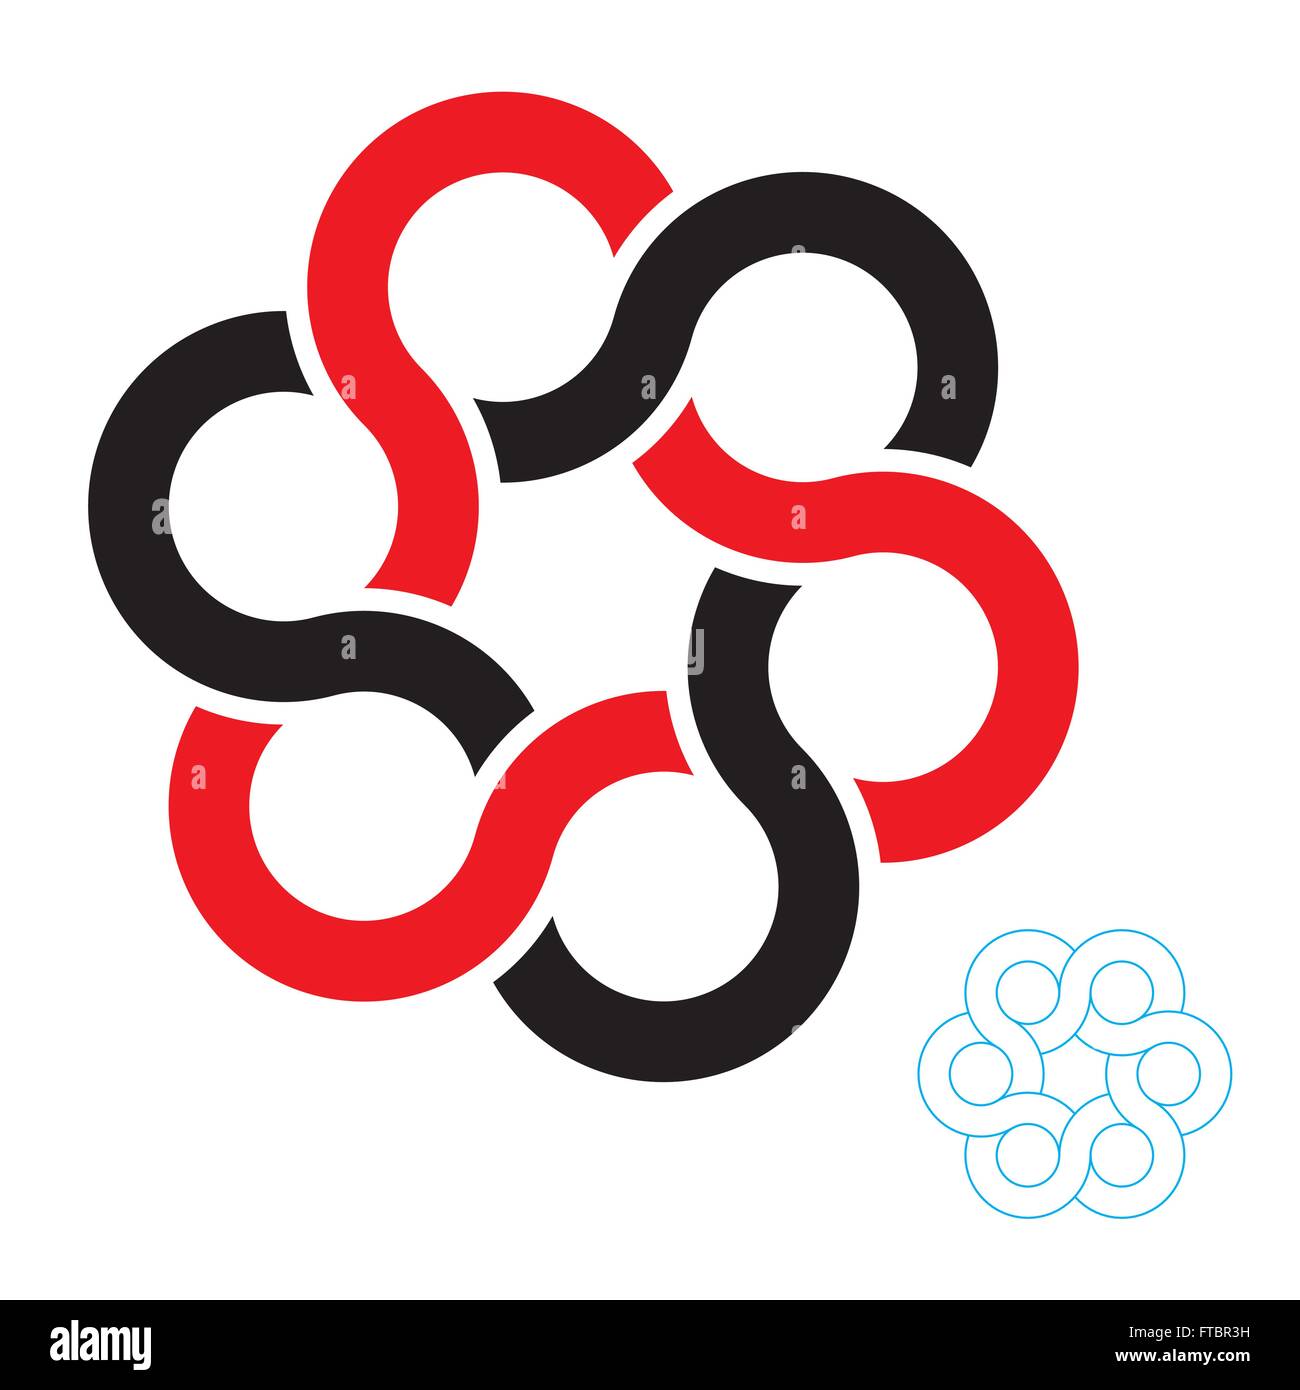 medieval abstract interlaced rings motif Stock Vector